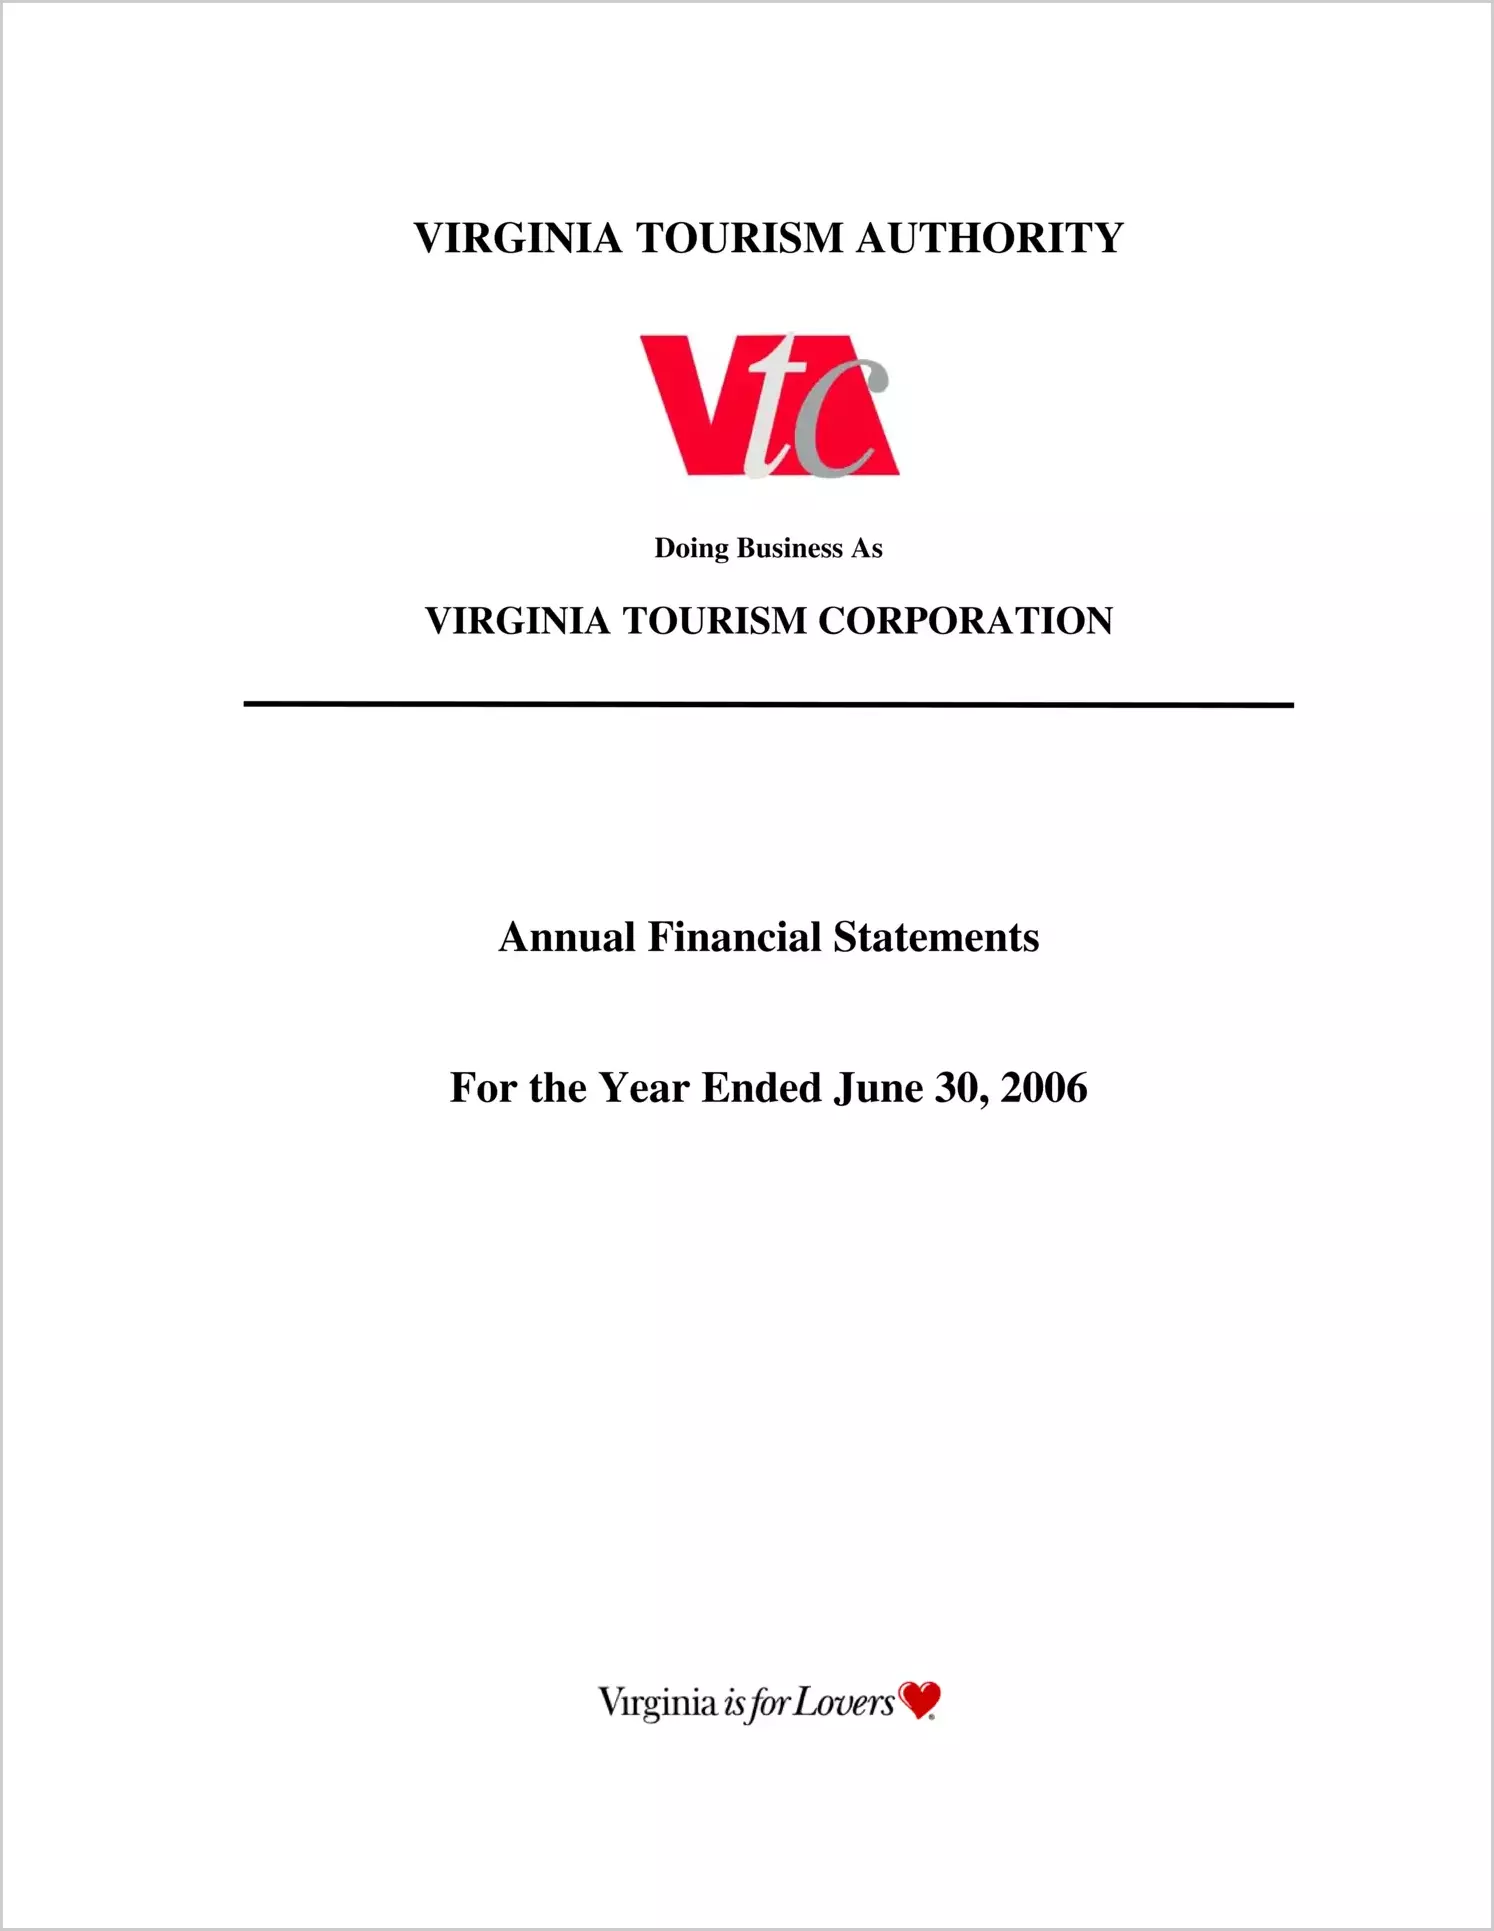 Virginia Tourism Authority for the year ended June 30, 2006